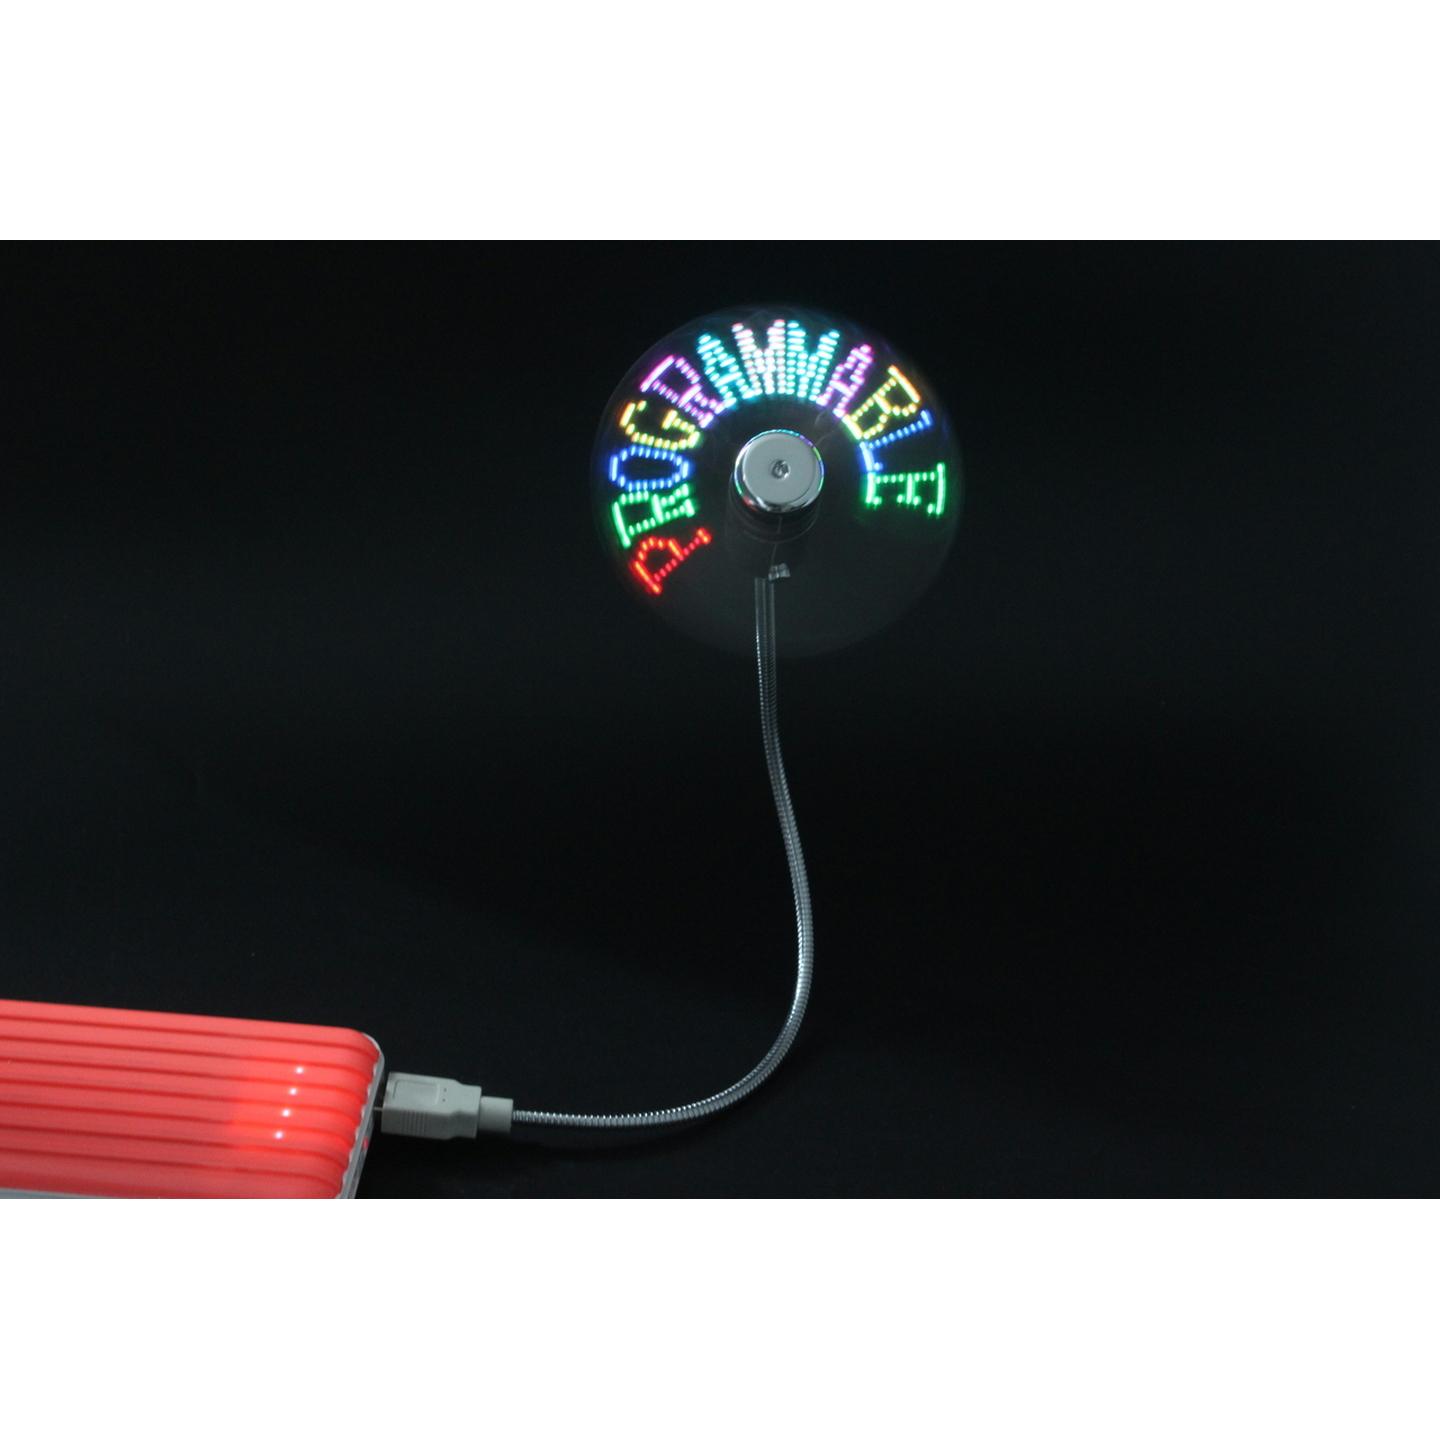 USB Personal Fan that Displays Programmable Messages